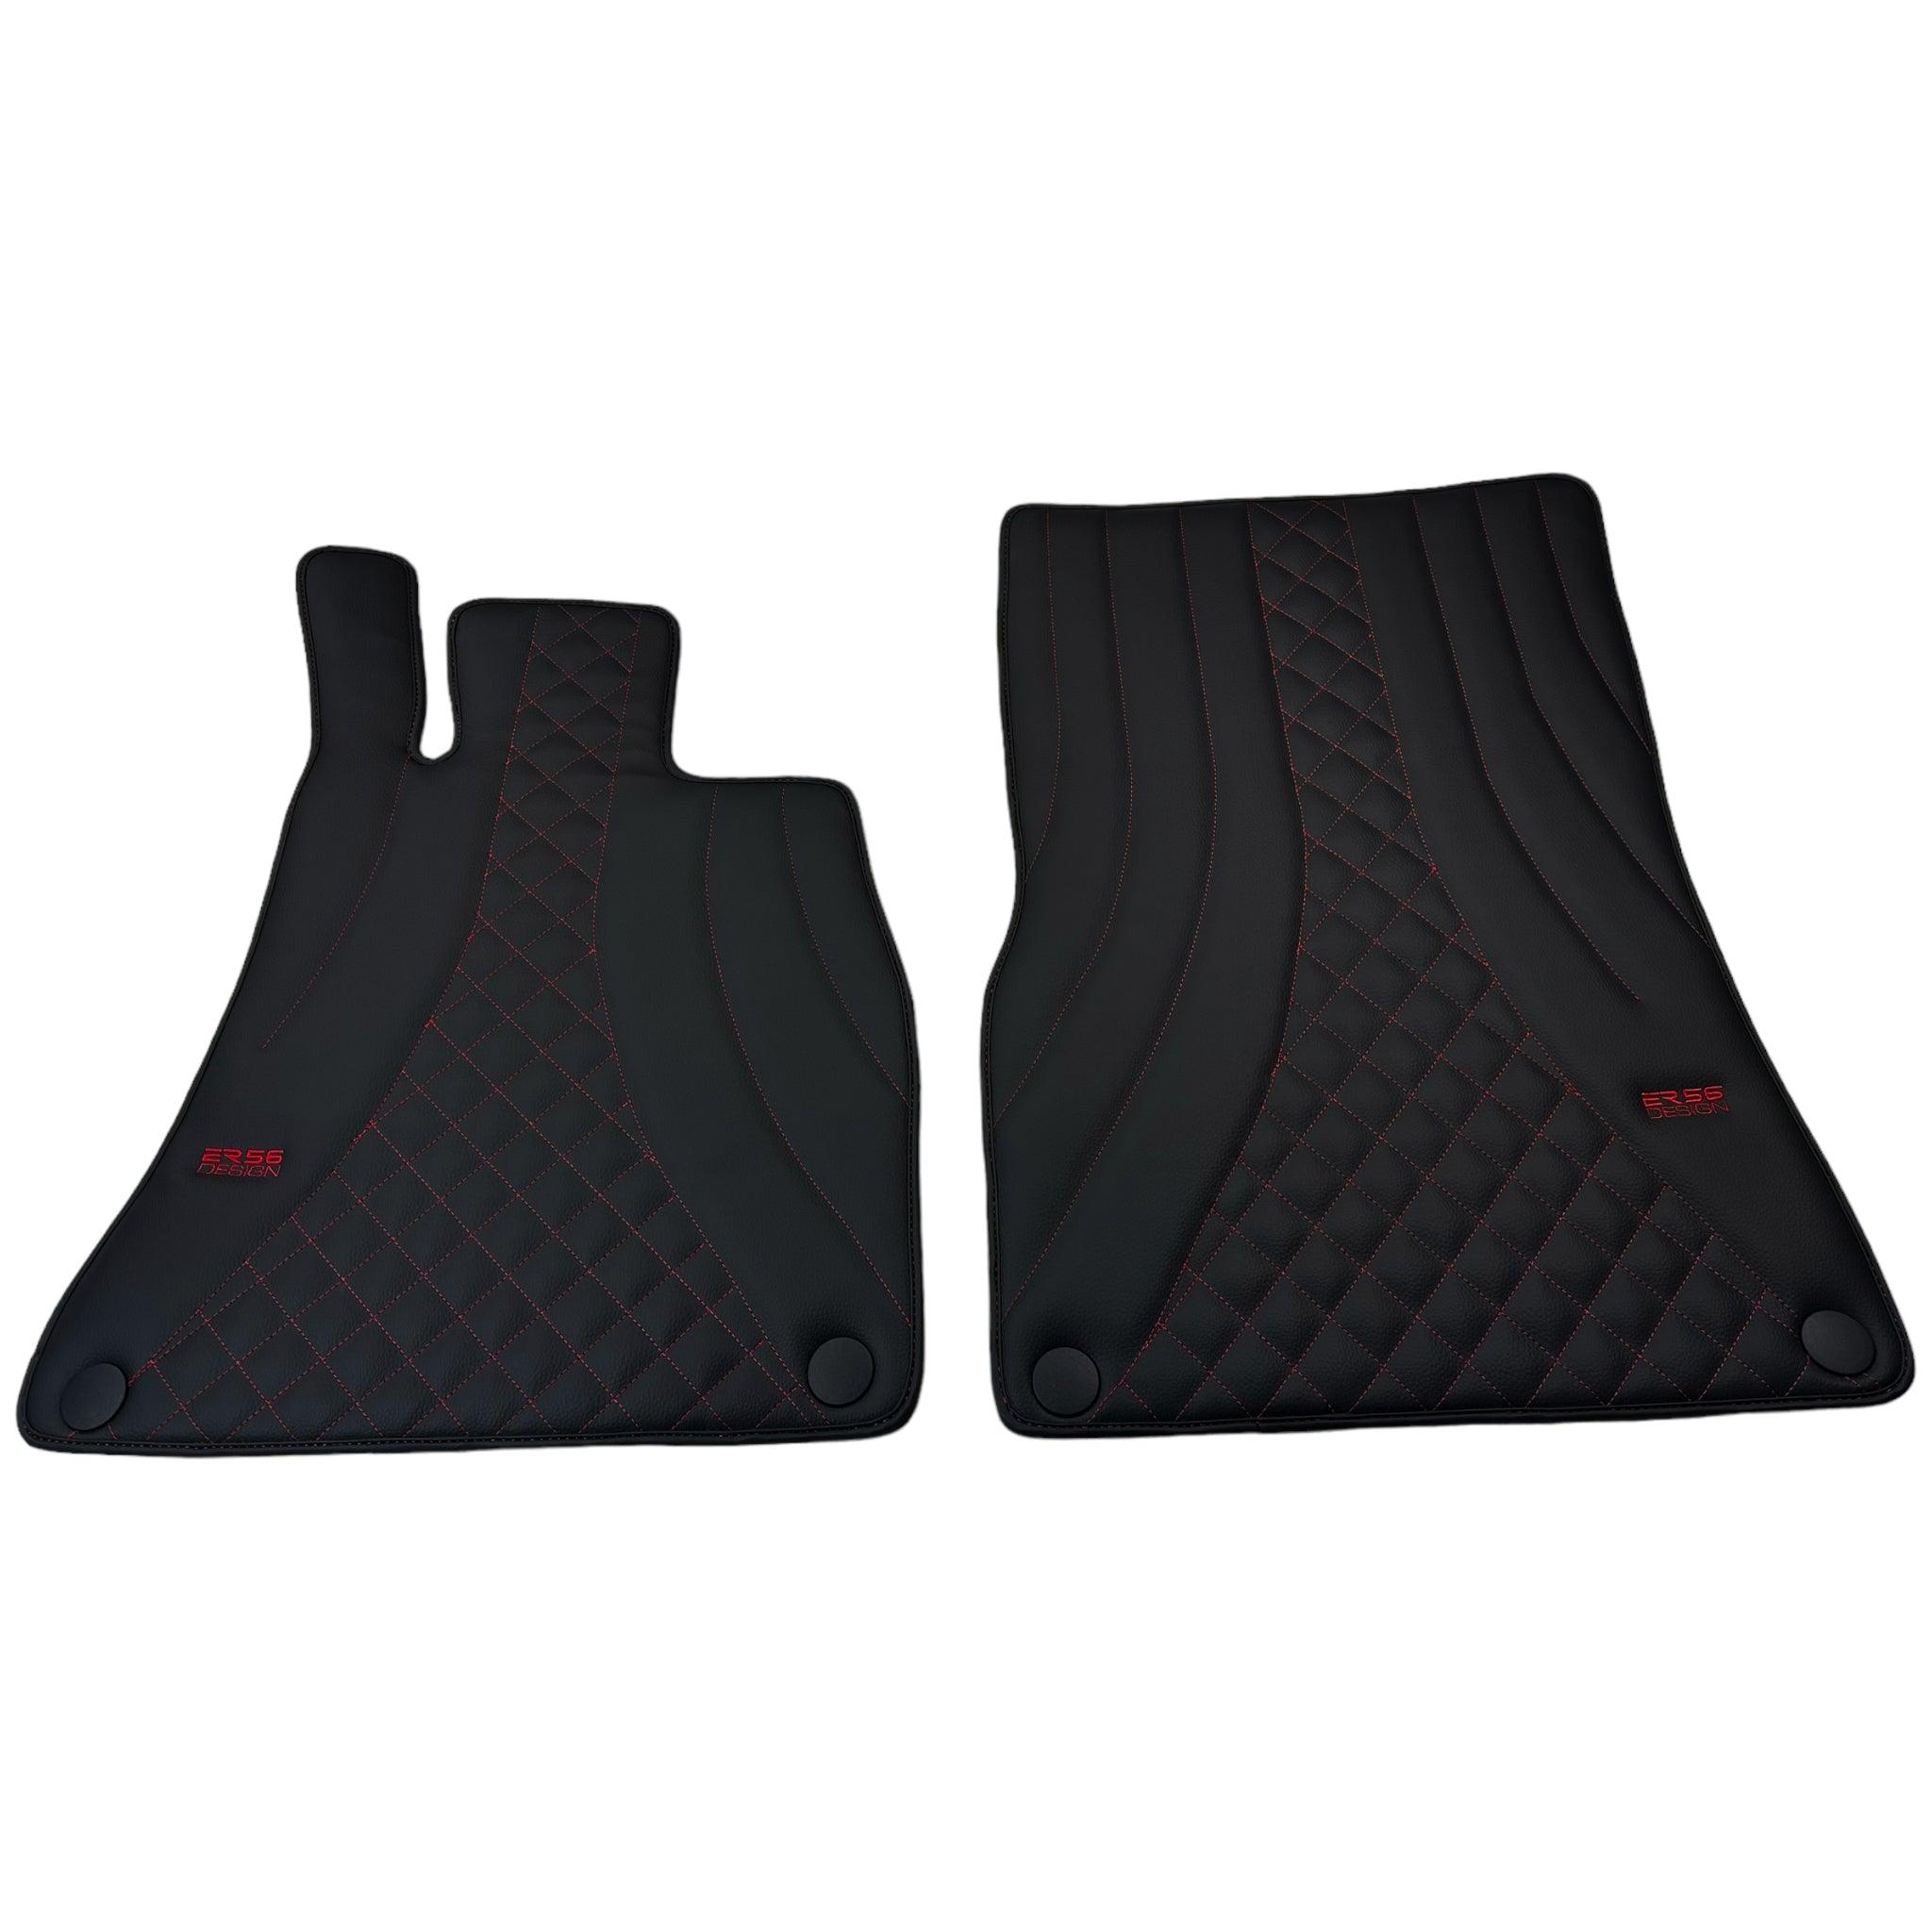 Black Leather Floor Mats For Mercedes Benz S-Class C126 Coupe (1981-1991)